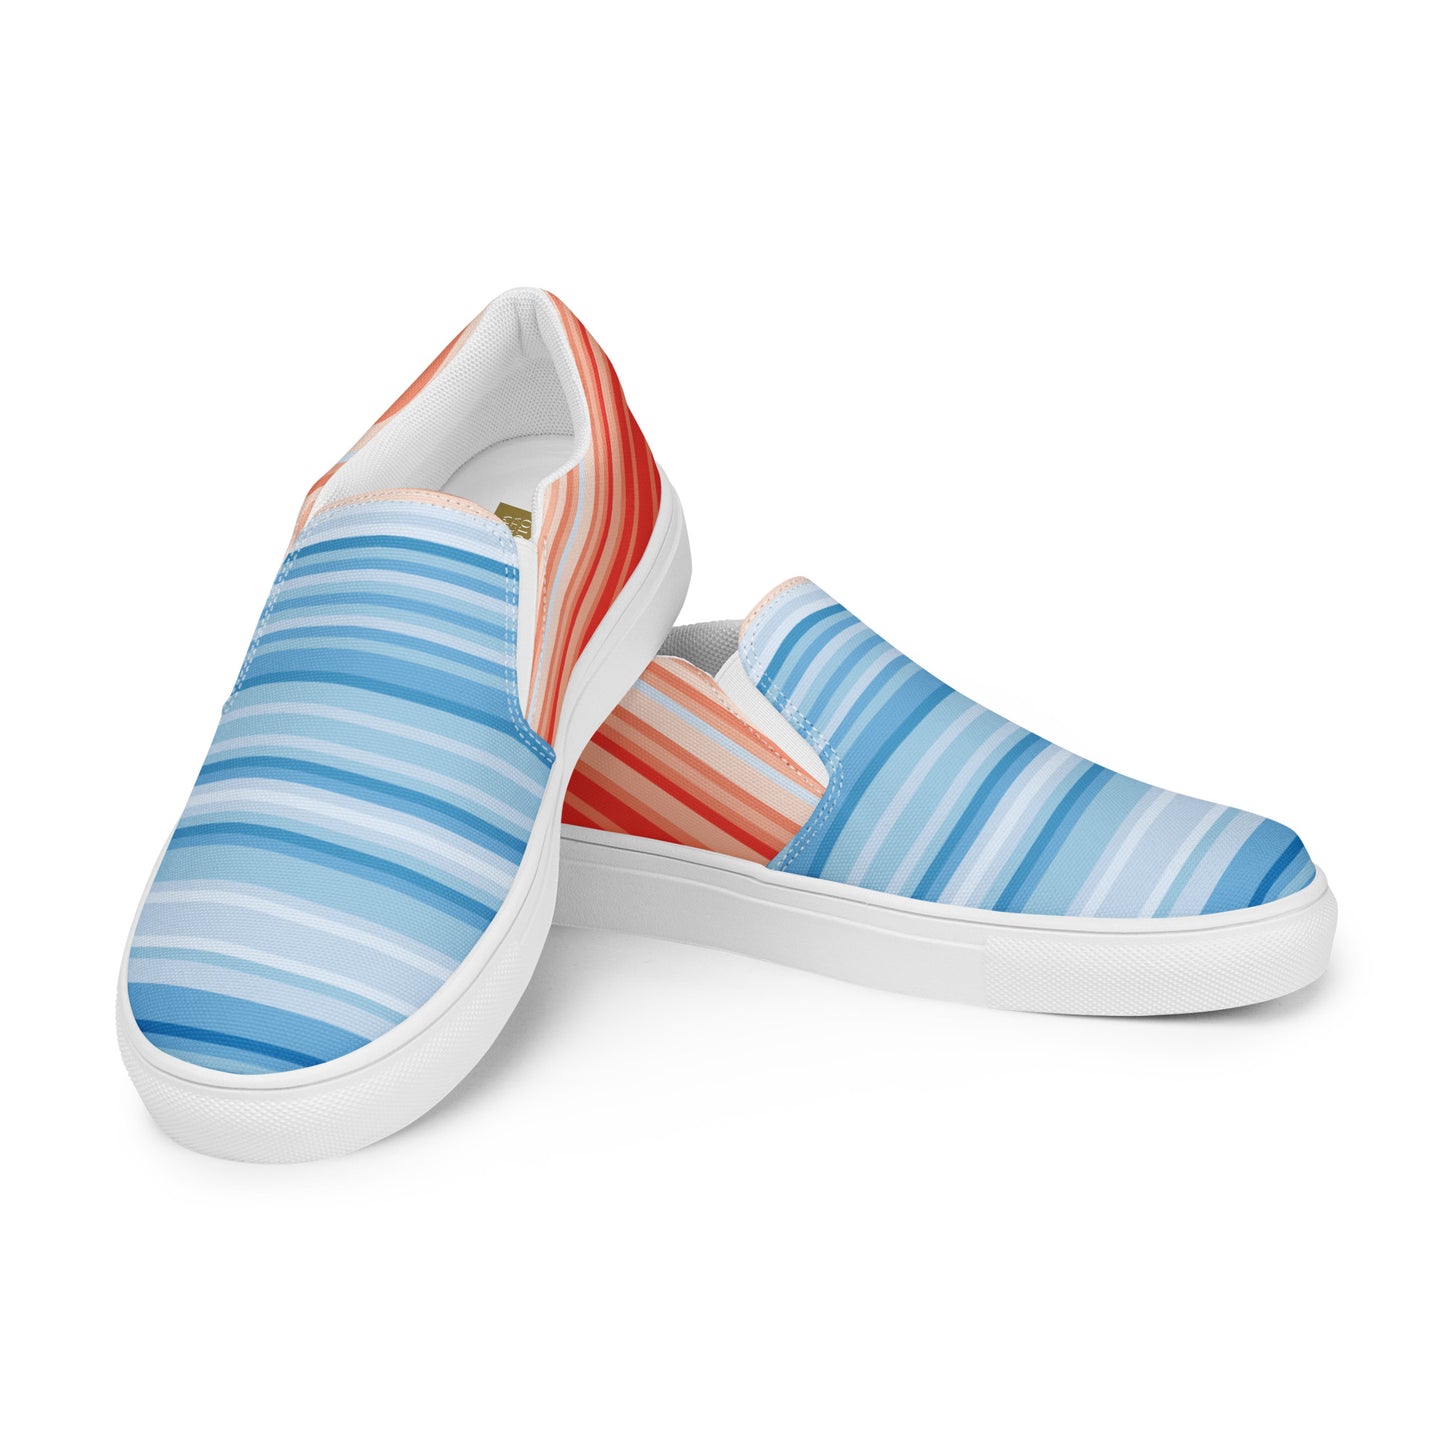 Climate Change Global Warming Stripes - Sustainably Made Women’s slip-on canvas shoes